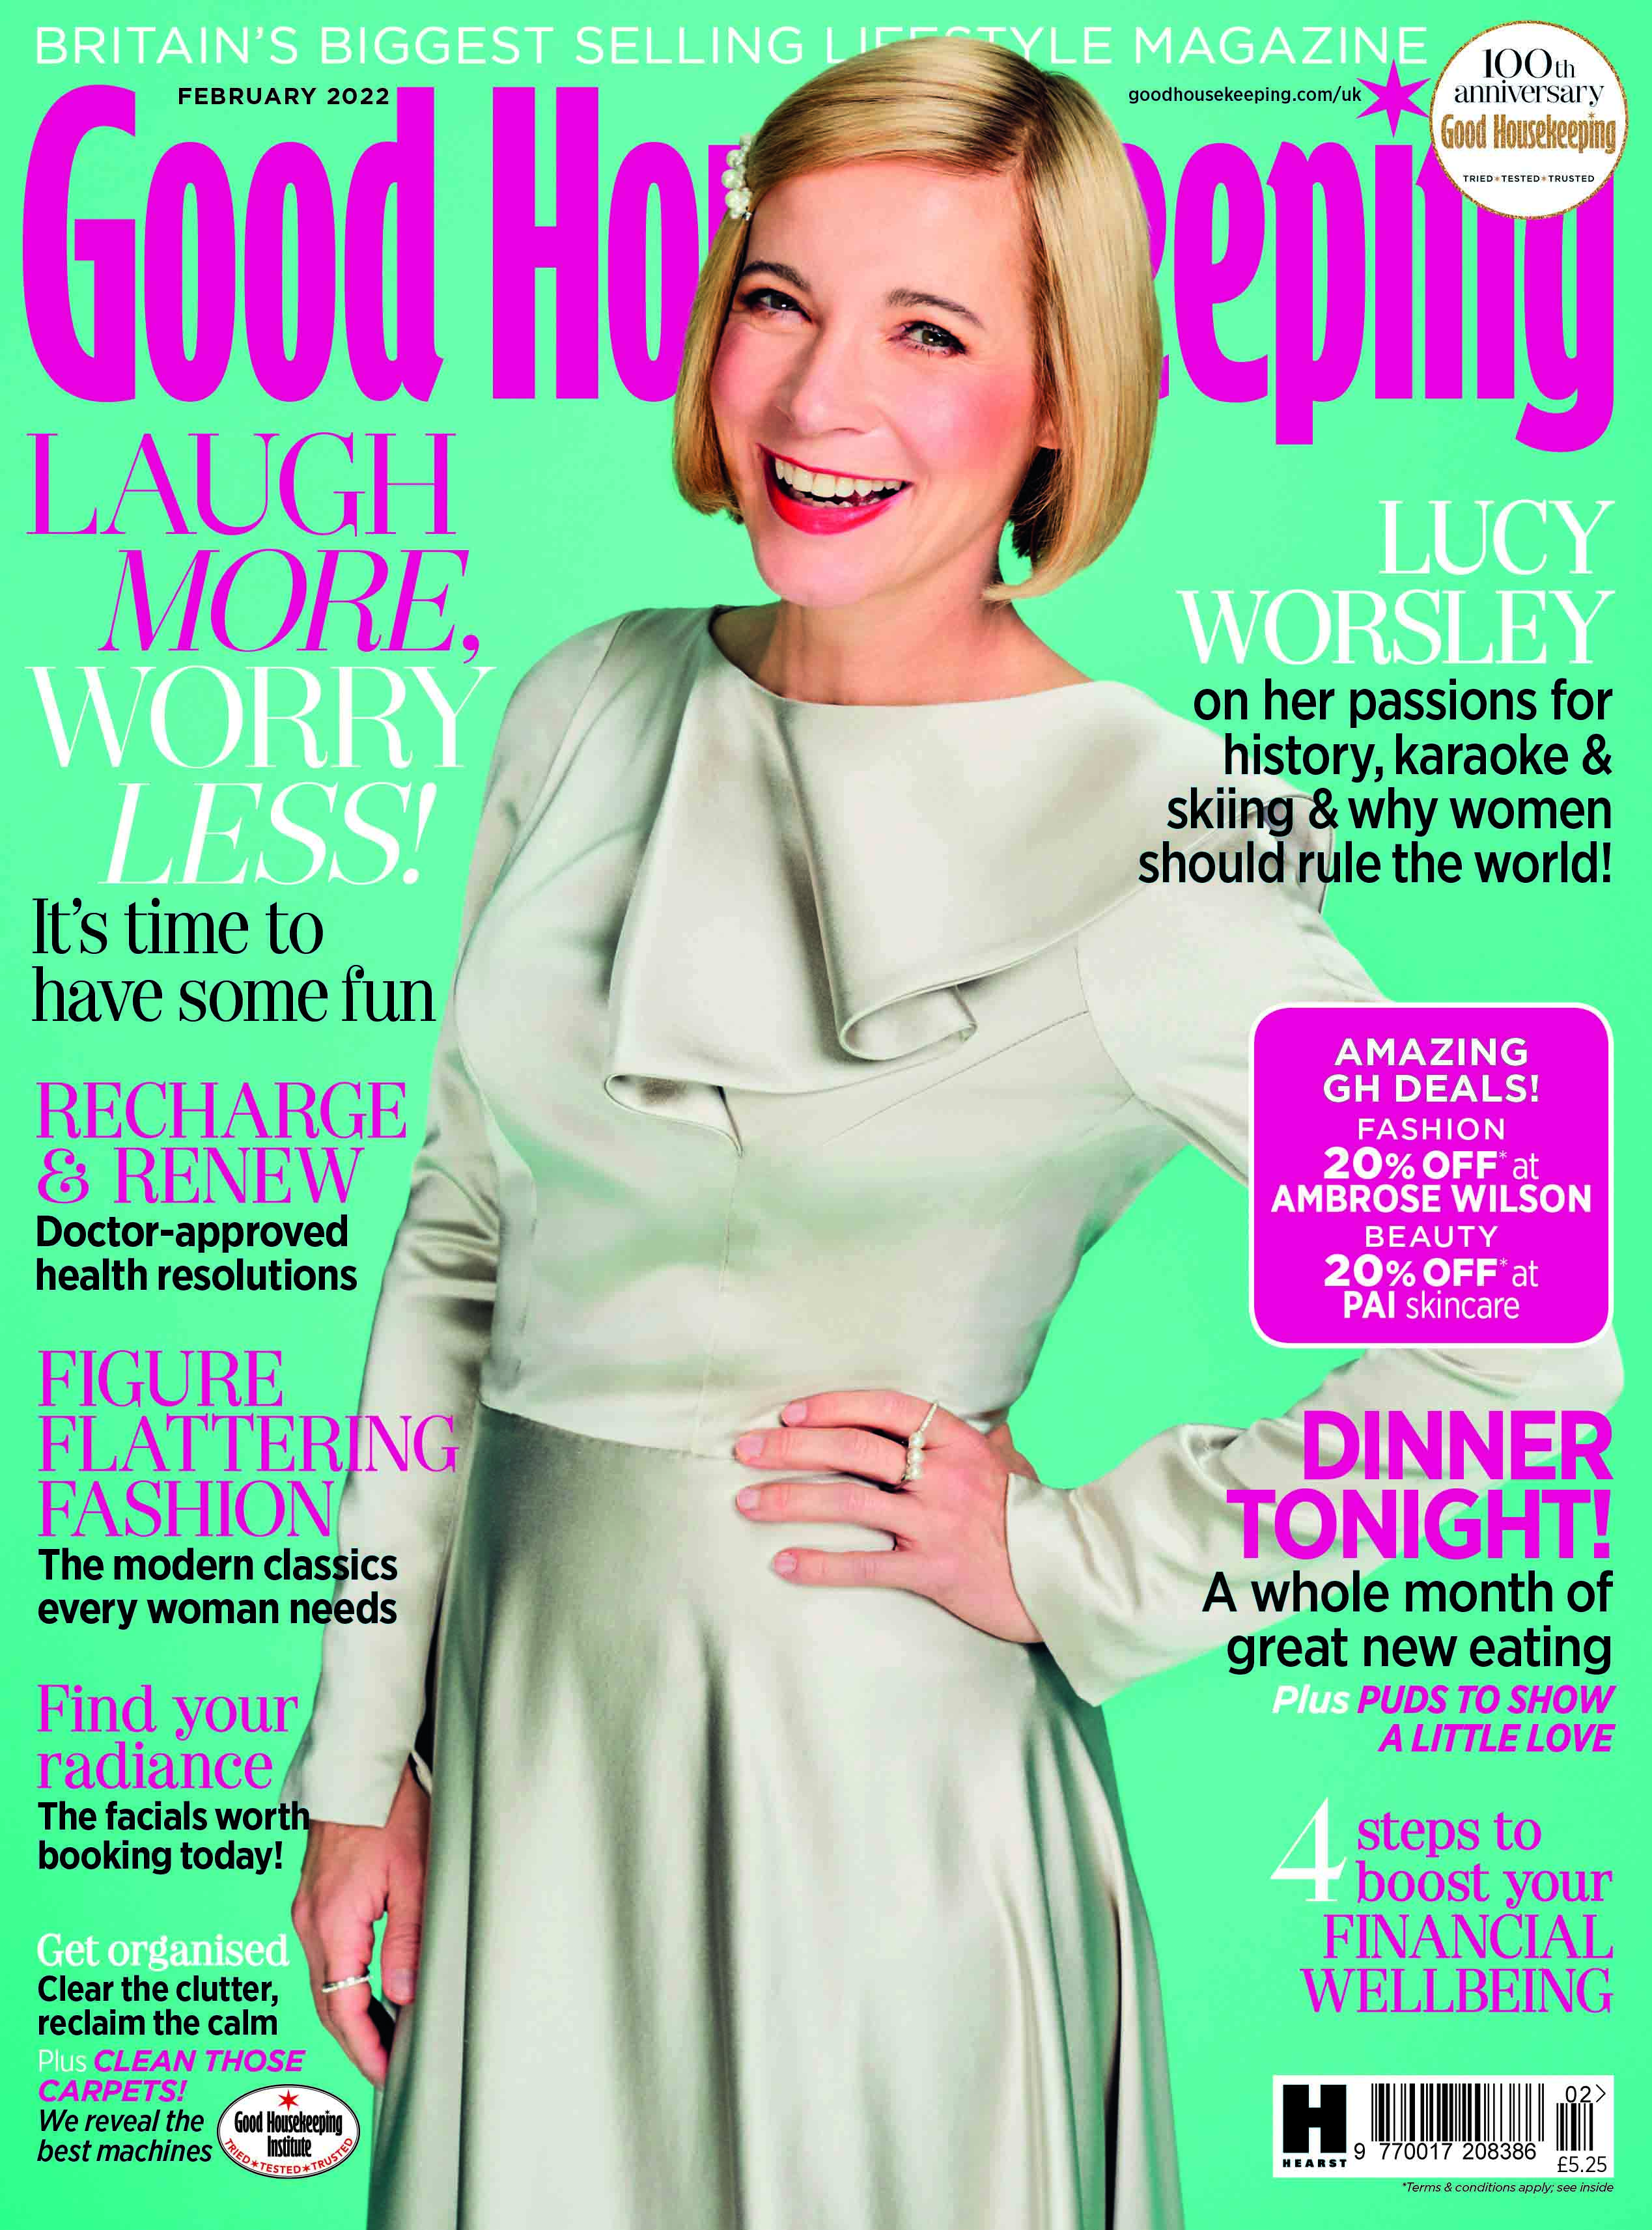 Lucy Worsley smiling with her hand on her hip.